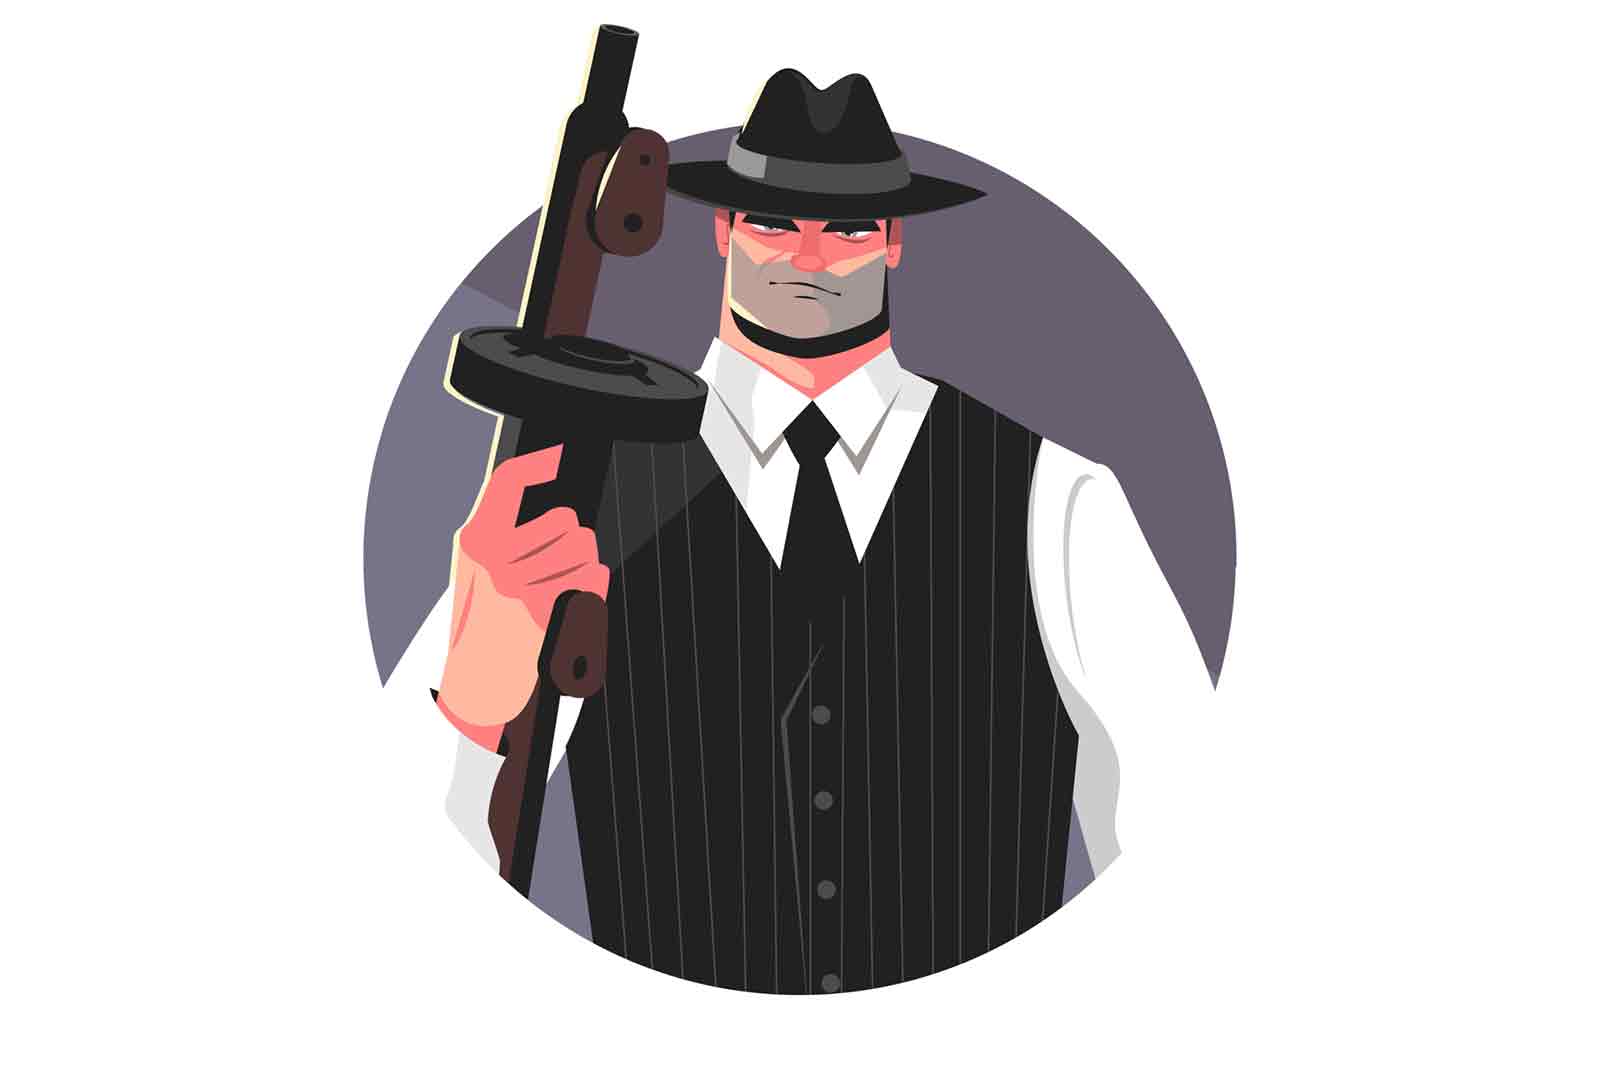 Mafia gangster with machine gun vector illustration. Male gang with handgun. Bearded evil killer with weapon flat style concept. Isolated on white background